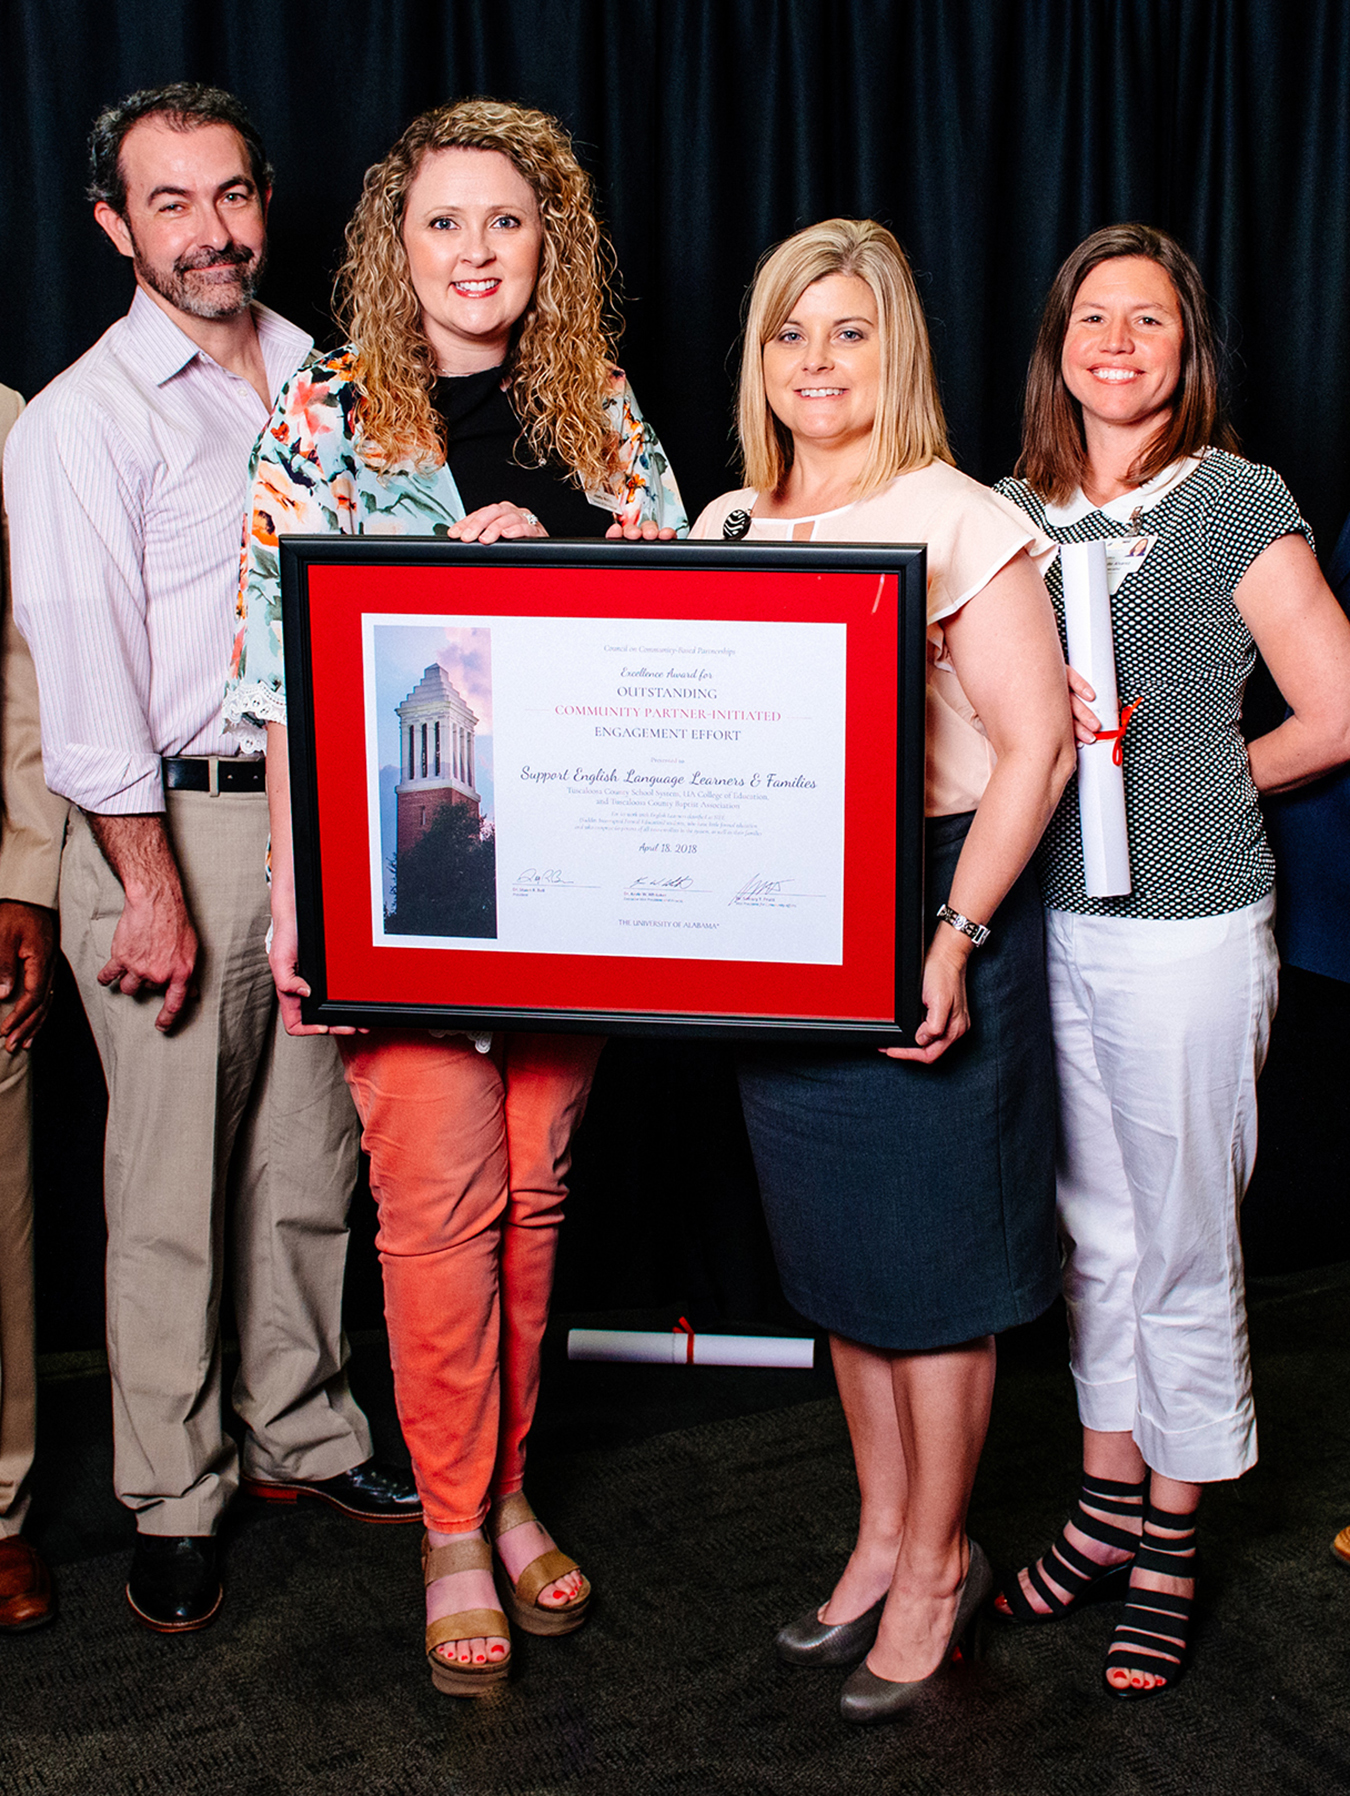 The Community-Building and Sustainability Program Team of Tuscaloosa County School Systemaccepts the Excellence Award for Outstanding Community Partner-Initiated Engagement Effort for “Support English Language Learners and Families.”